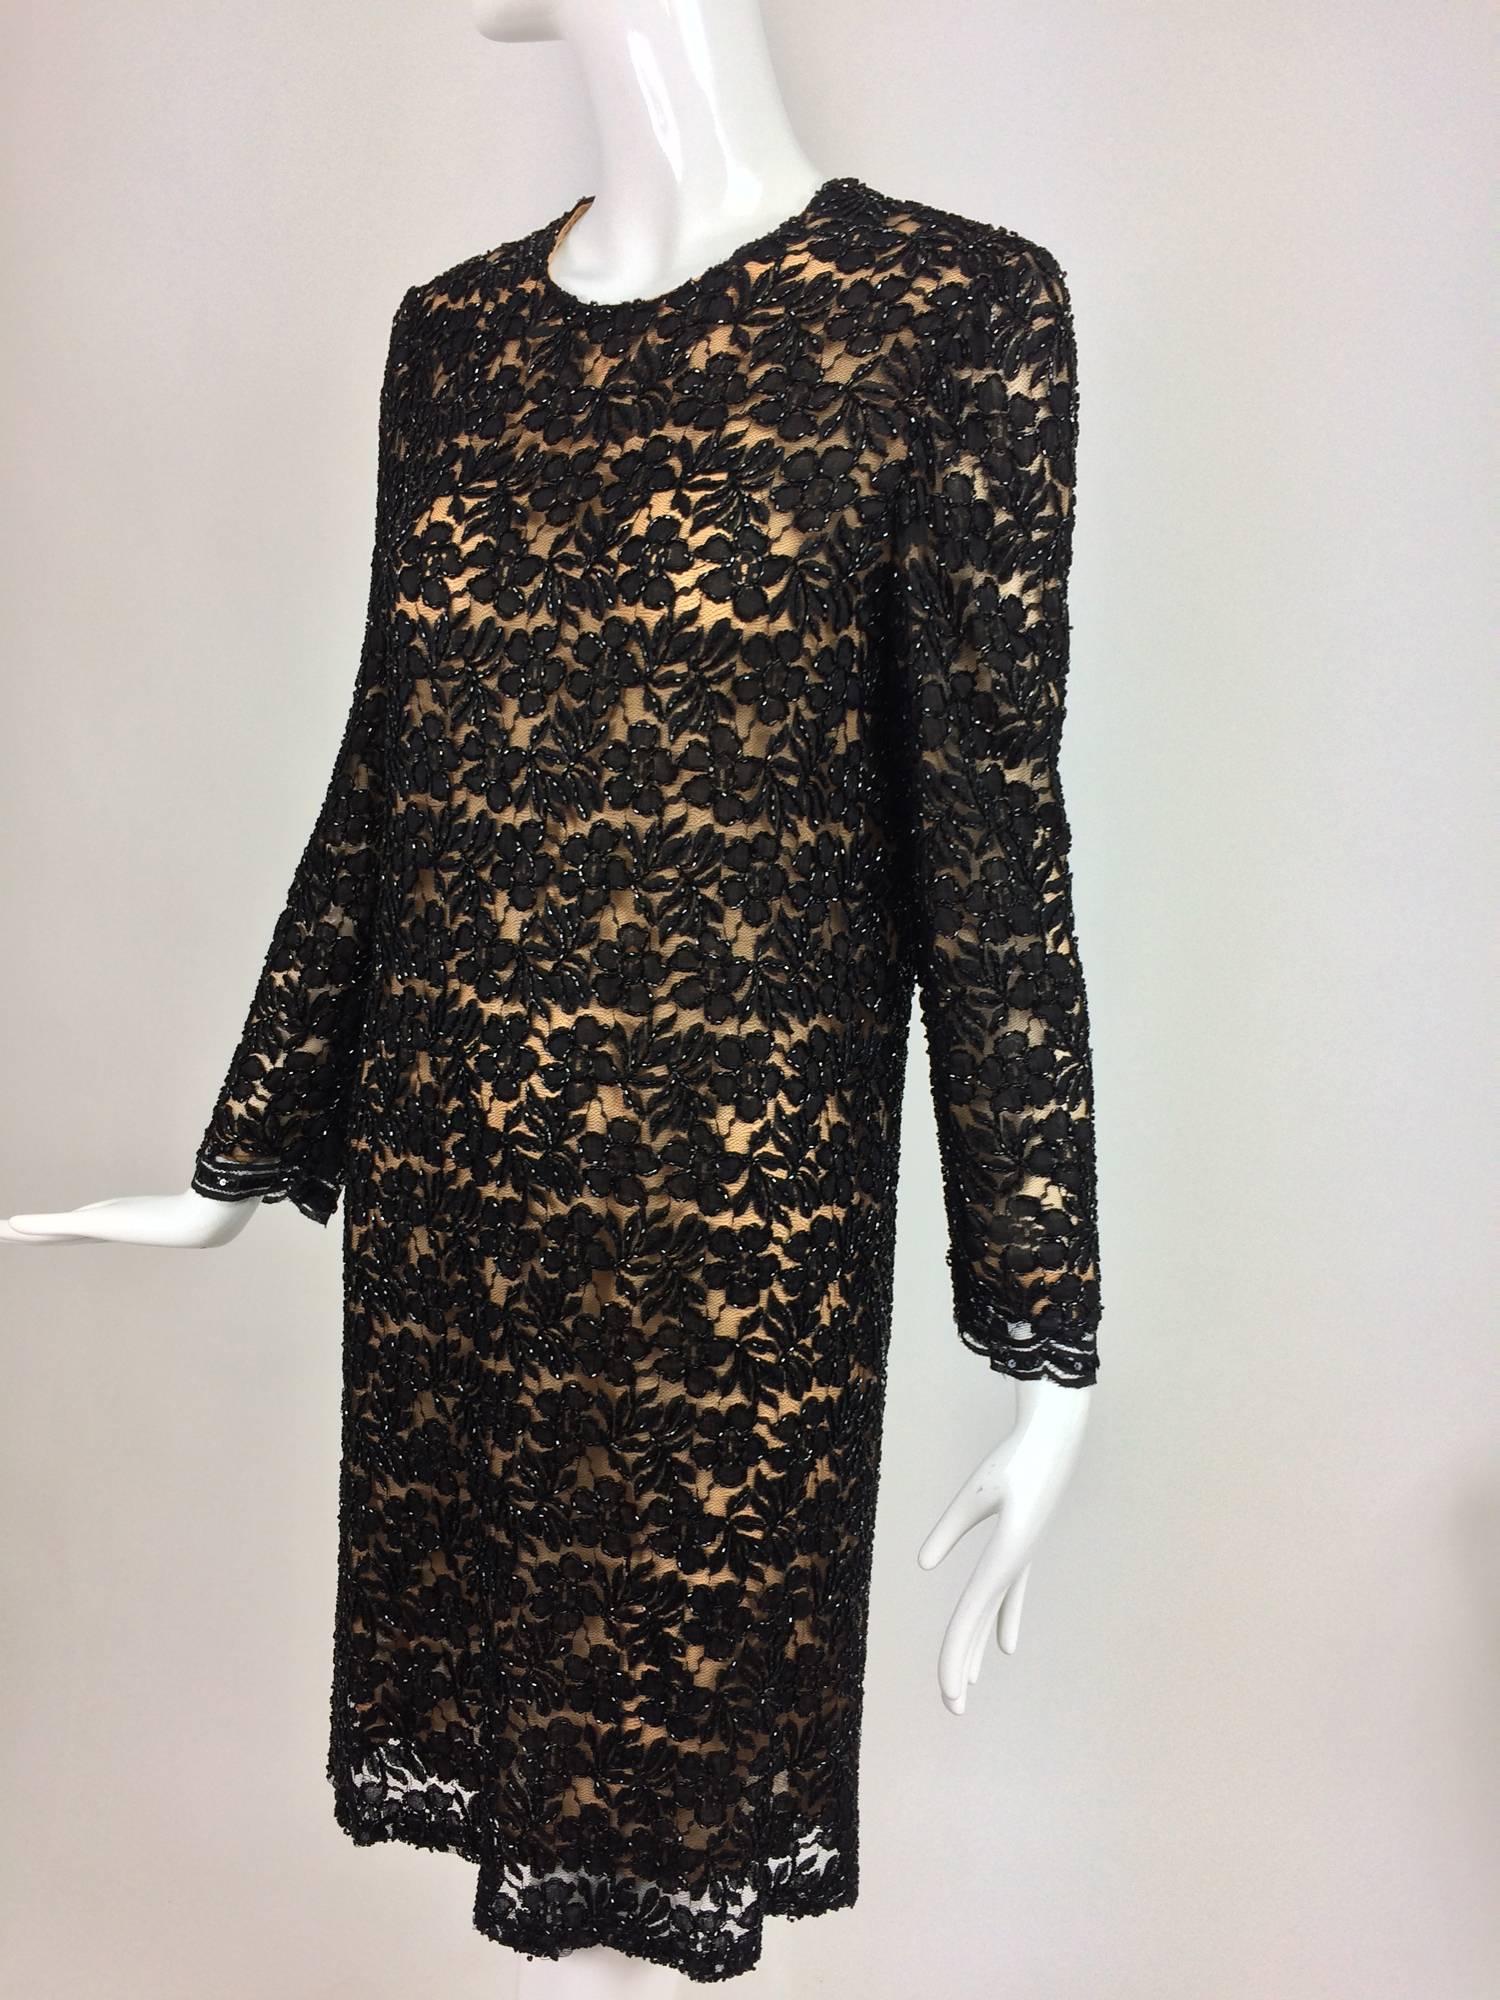 Women's Vintage mod style beaded black floral lace nude lined cocktail dress 1960s